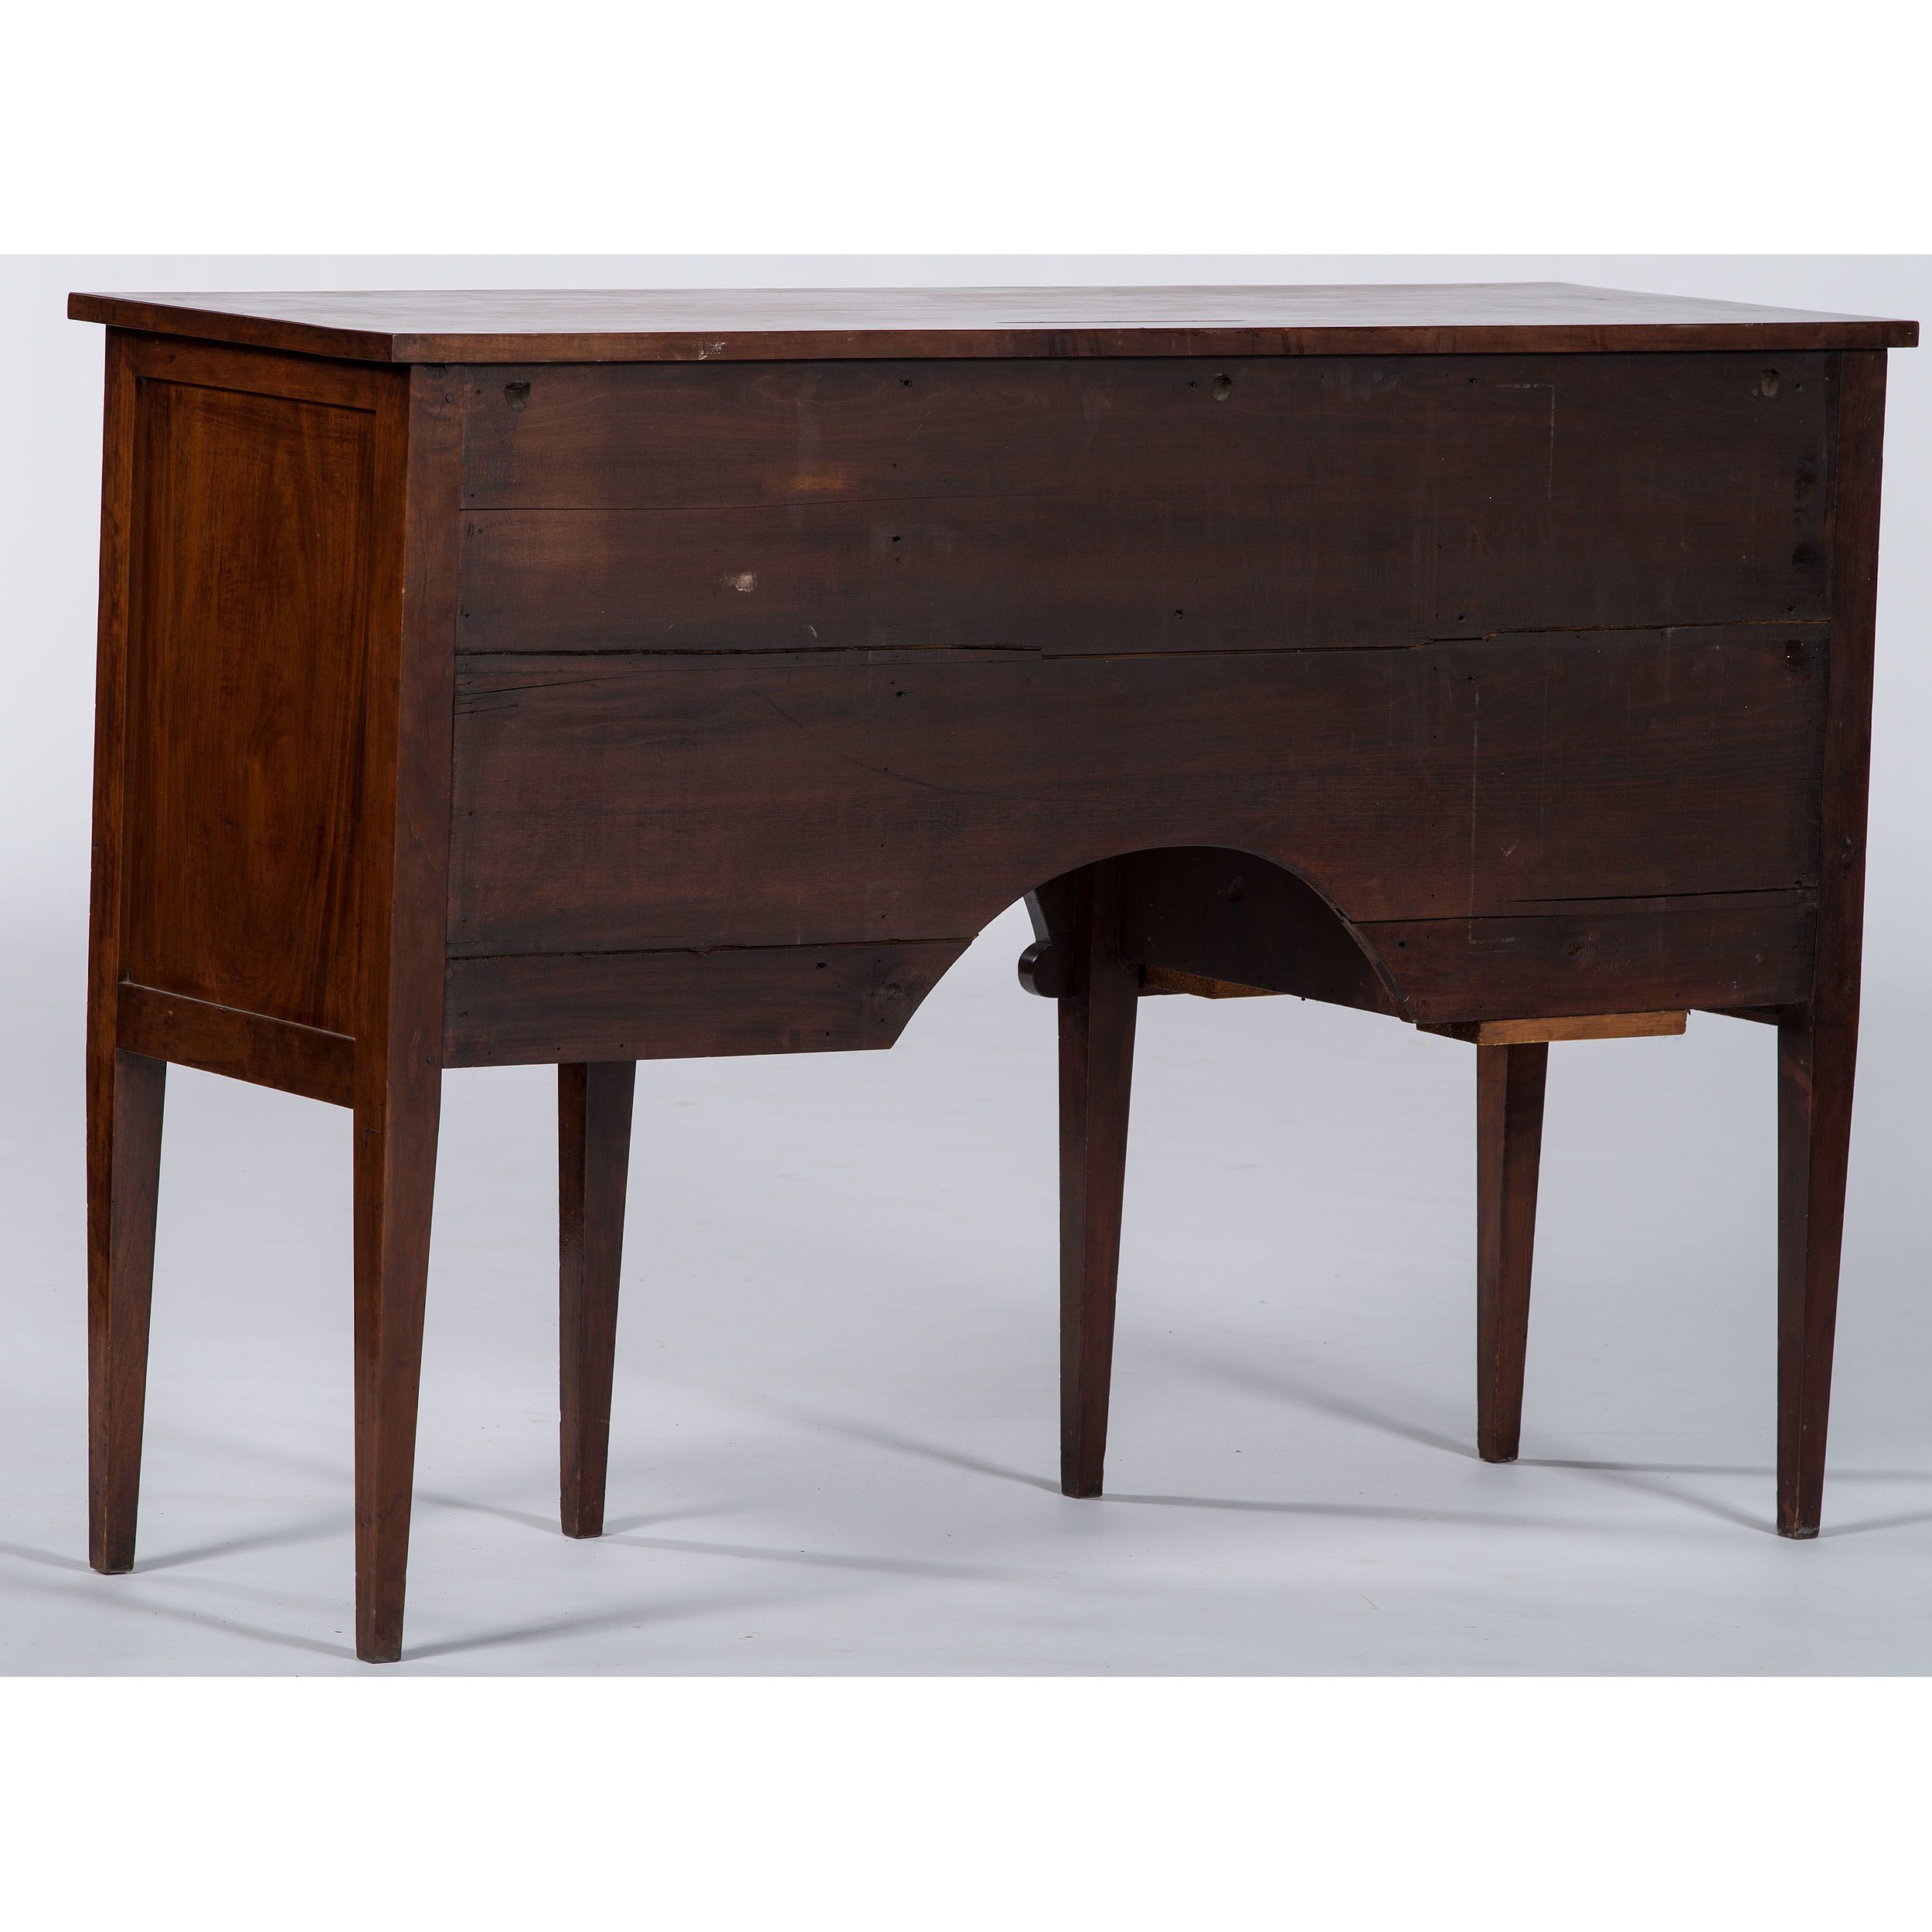 American Hepplewhite Sideboard | Cowan's Auction House: The Midwest's With Regard To Cleveland Sideboard (View 8 of 22)